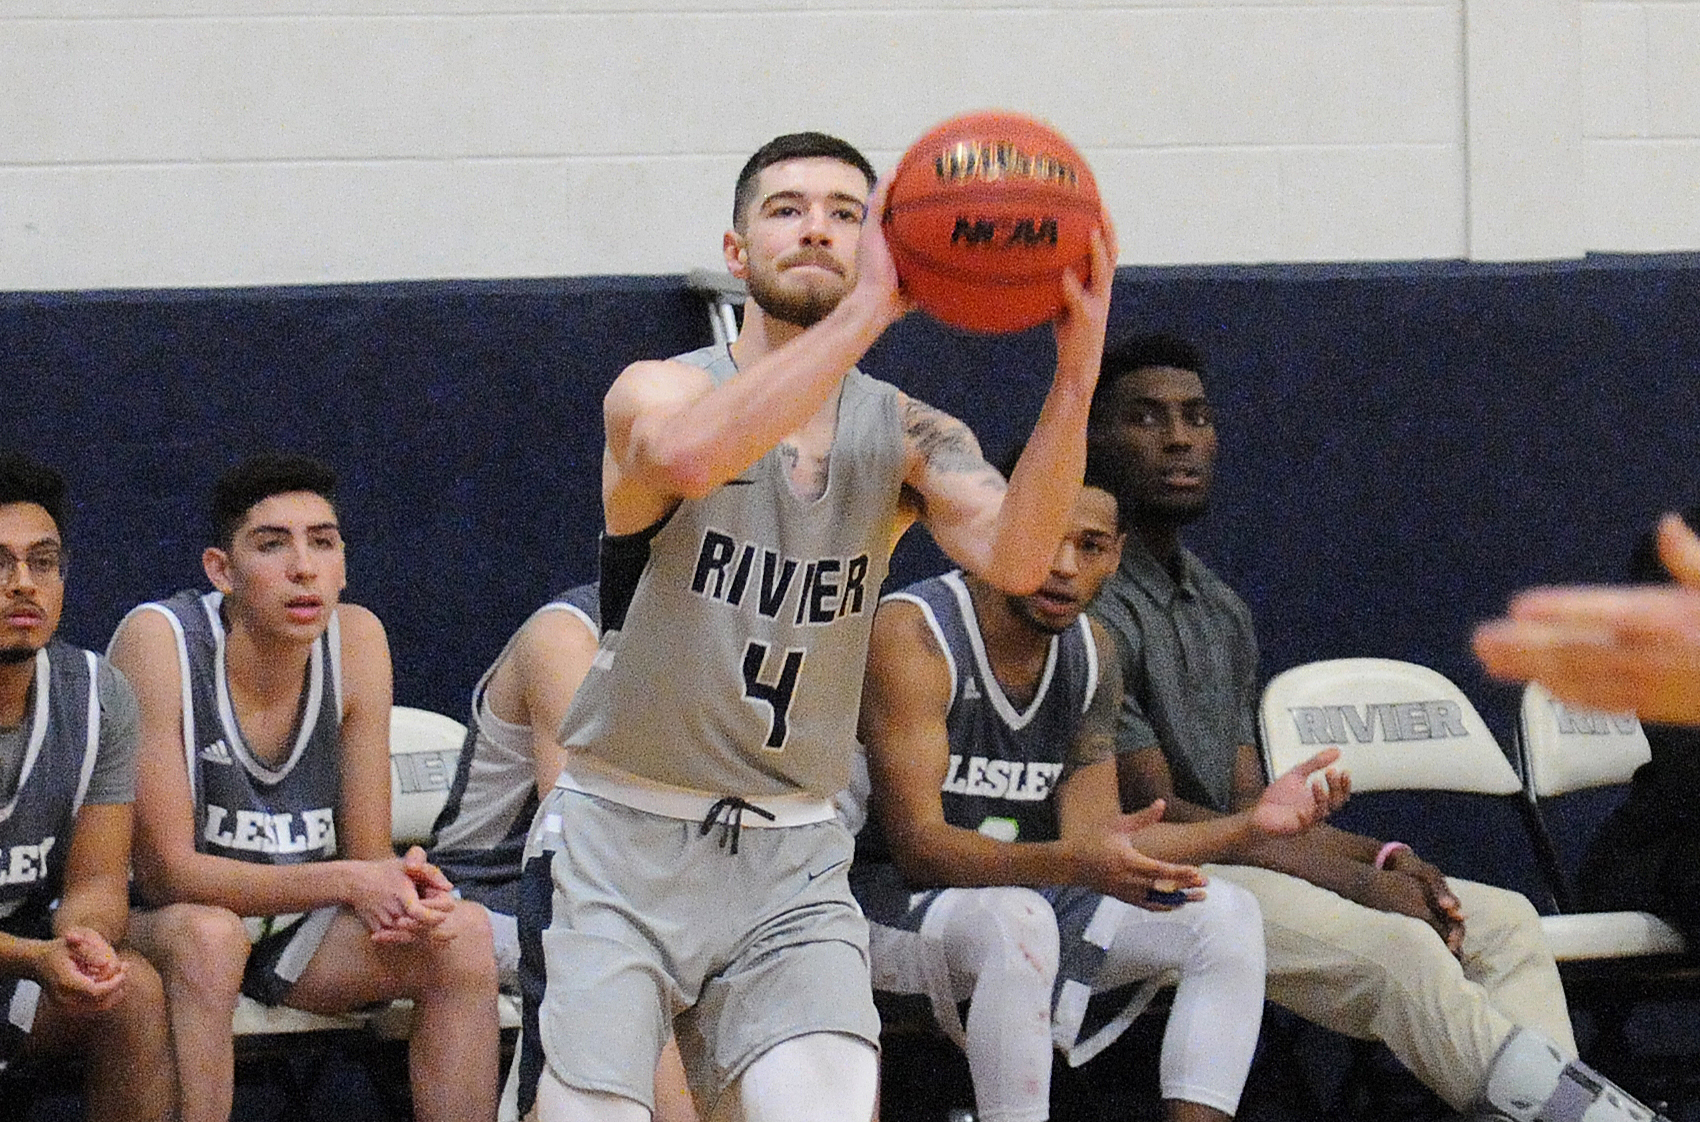 Men's Basketball: Raiders edged by Norwich, 91-83